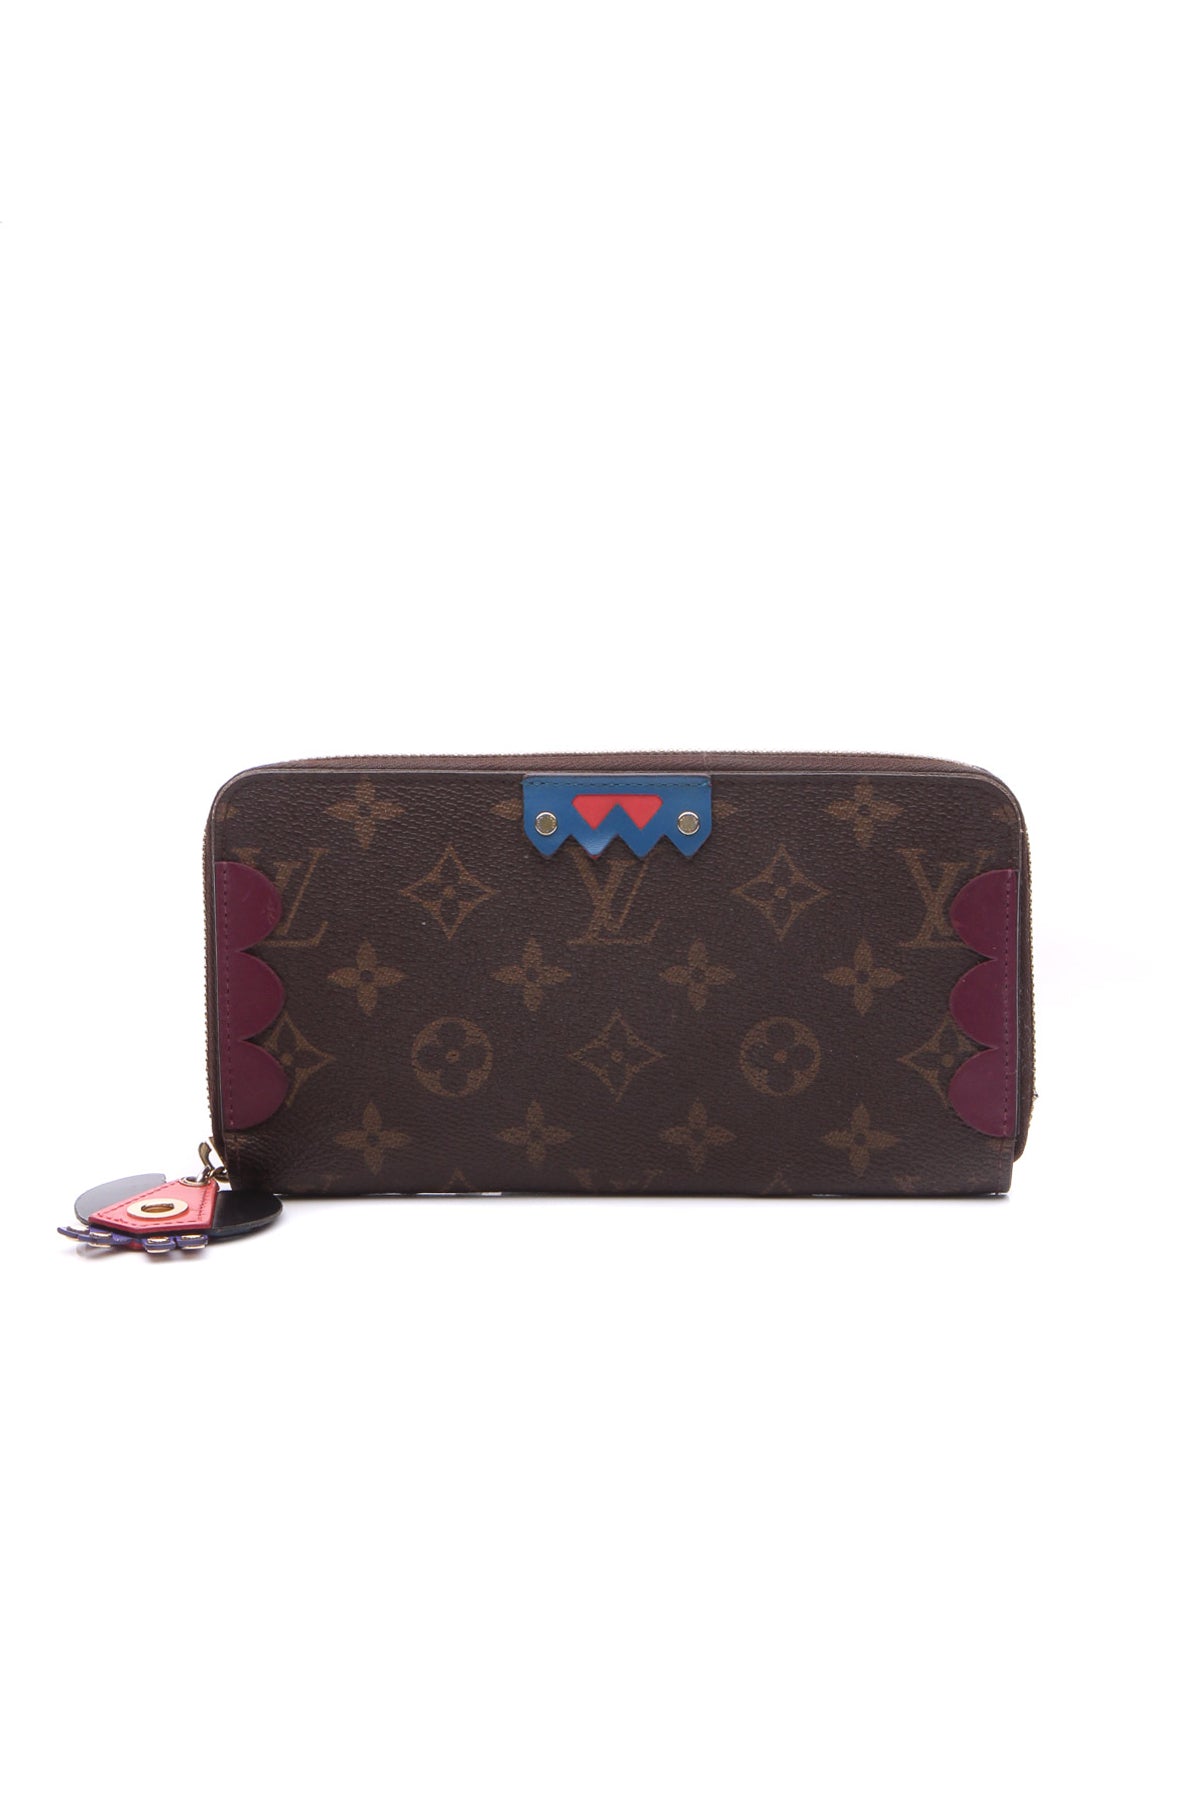 Louis Vuitton Wallets for sale in Tampa, Florida